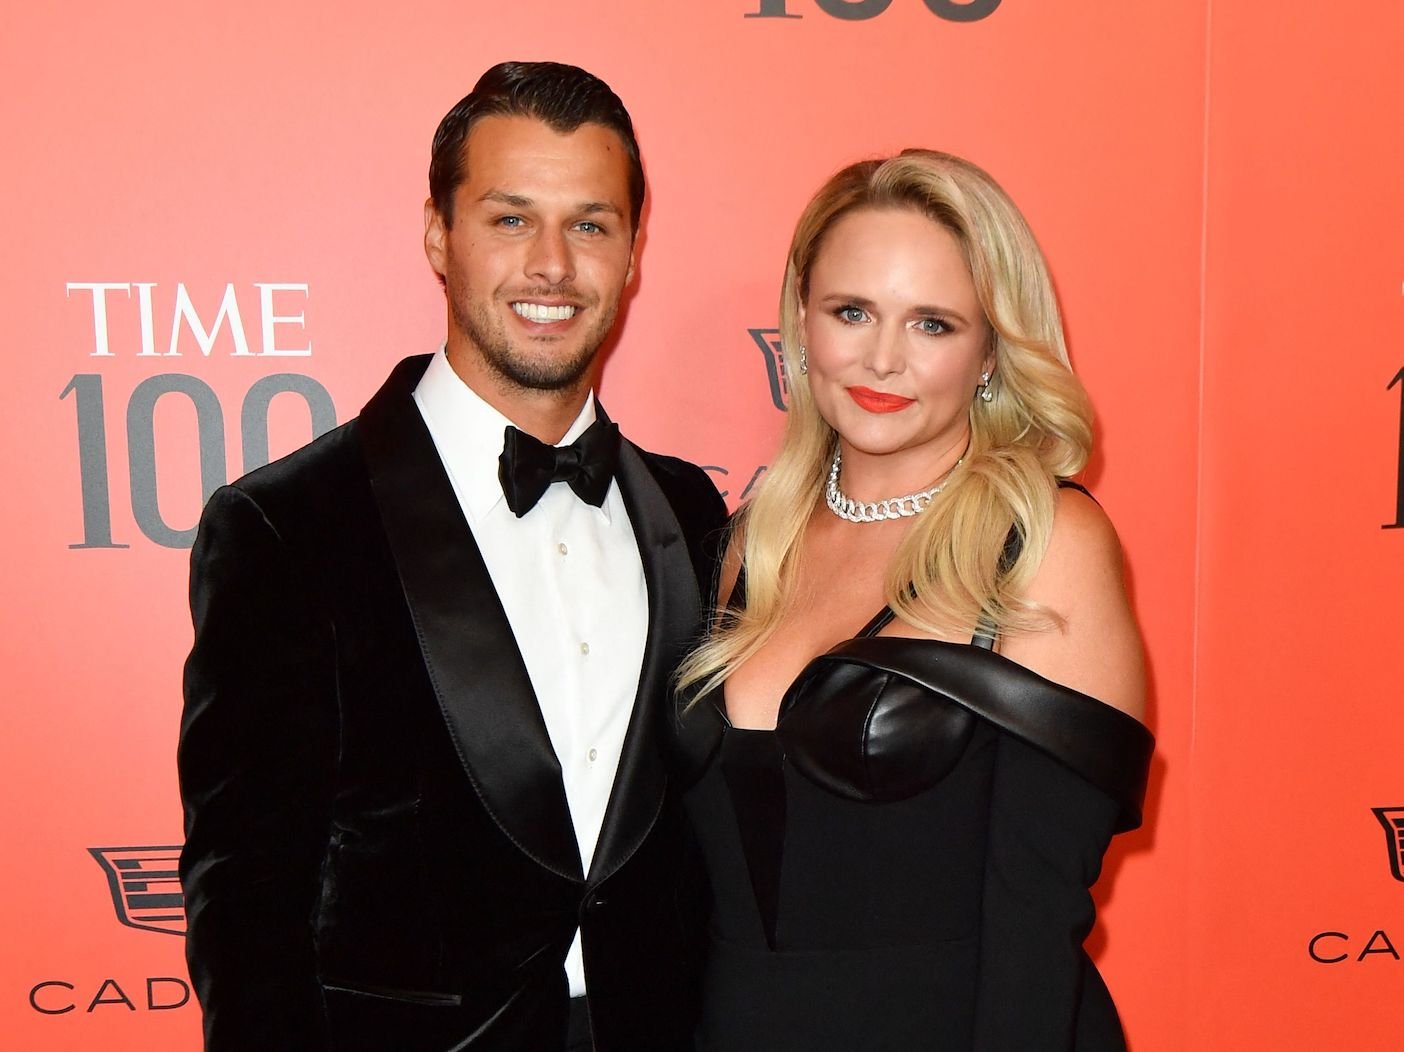 Sketchy Source Says Miranda Lambert’s Husband Supposedly Begging Her To Increase His Allowance